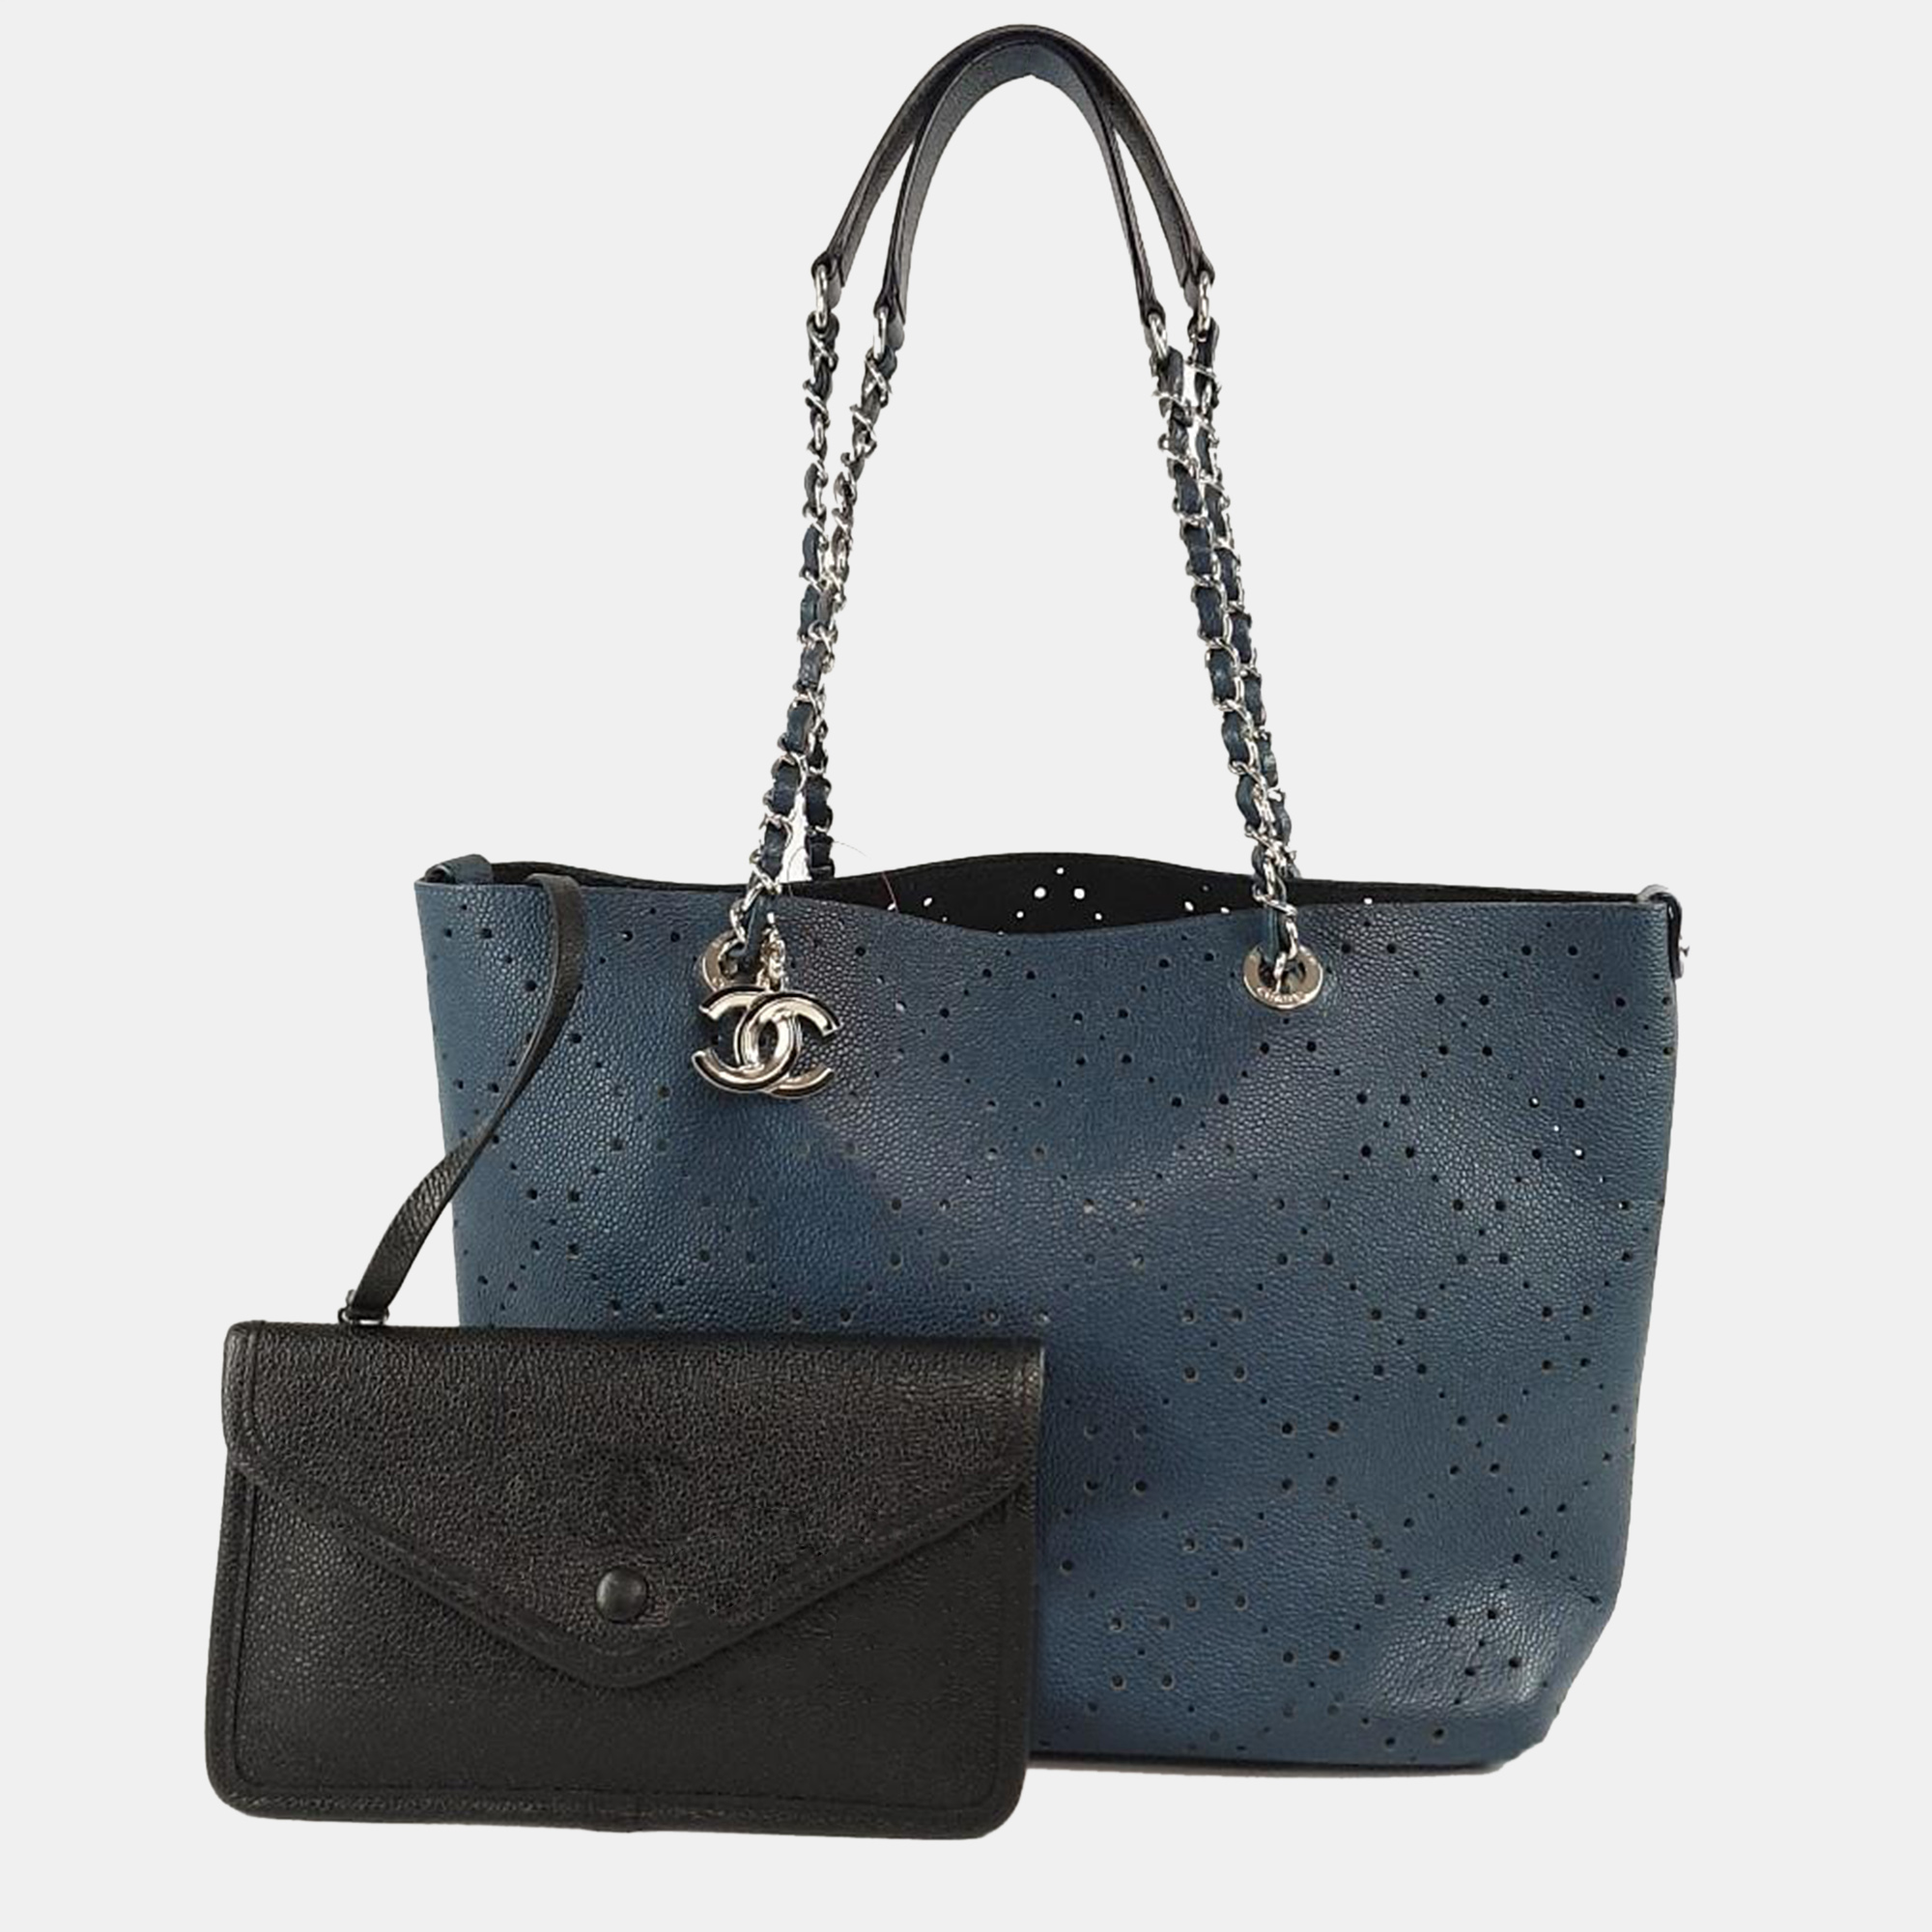 Chanel blue perforated leather punchin chain tote bag